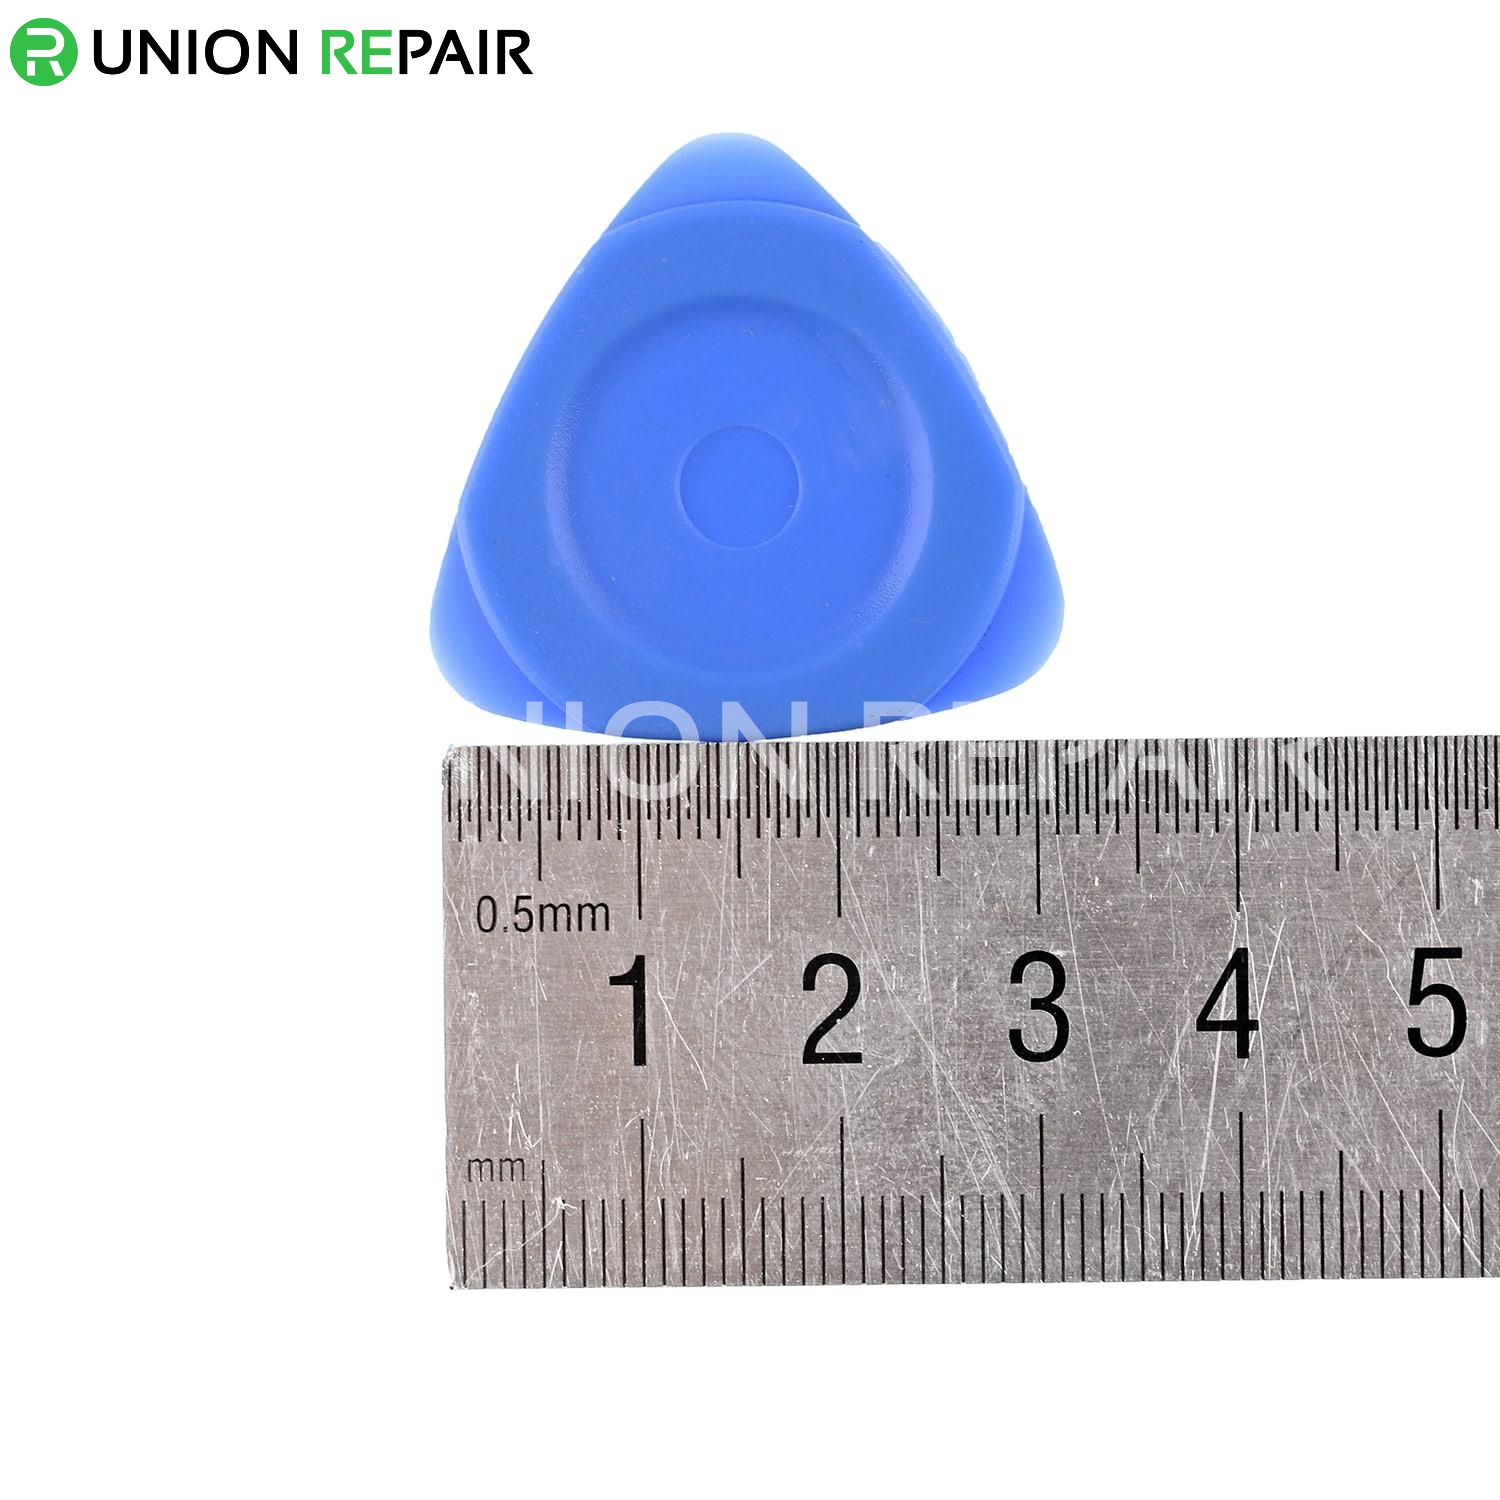  Kaisi Blue Guitar Pick Disassembly Tool, fig. 1 